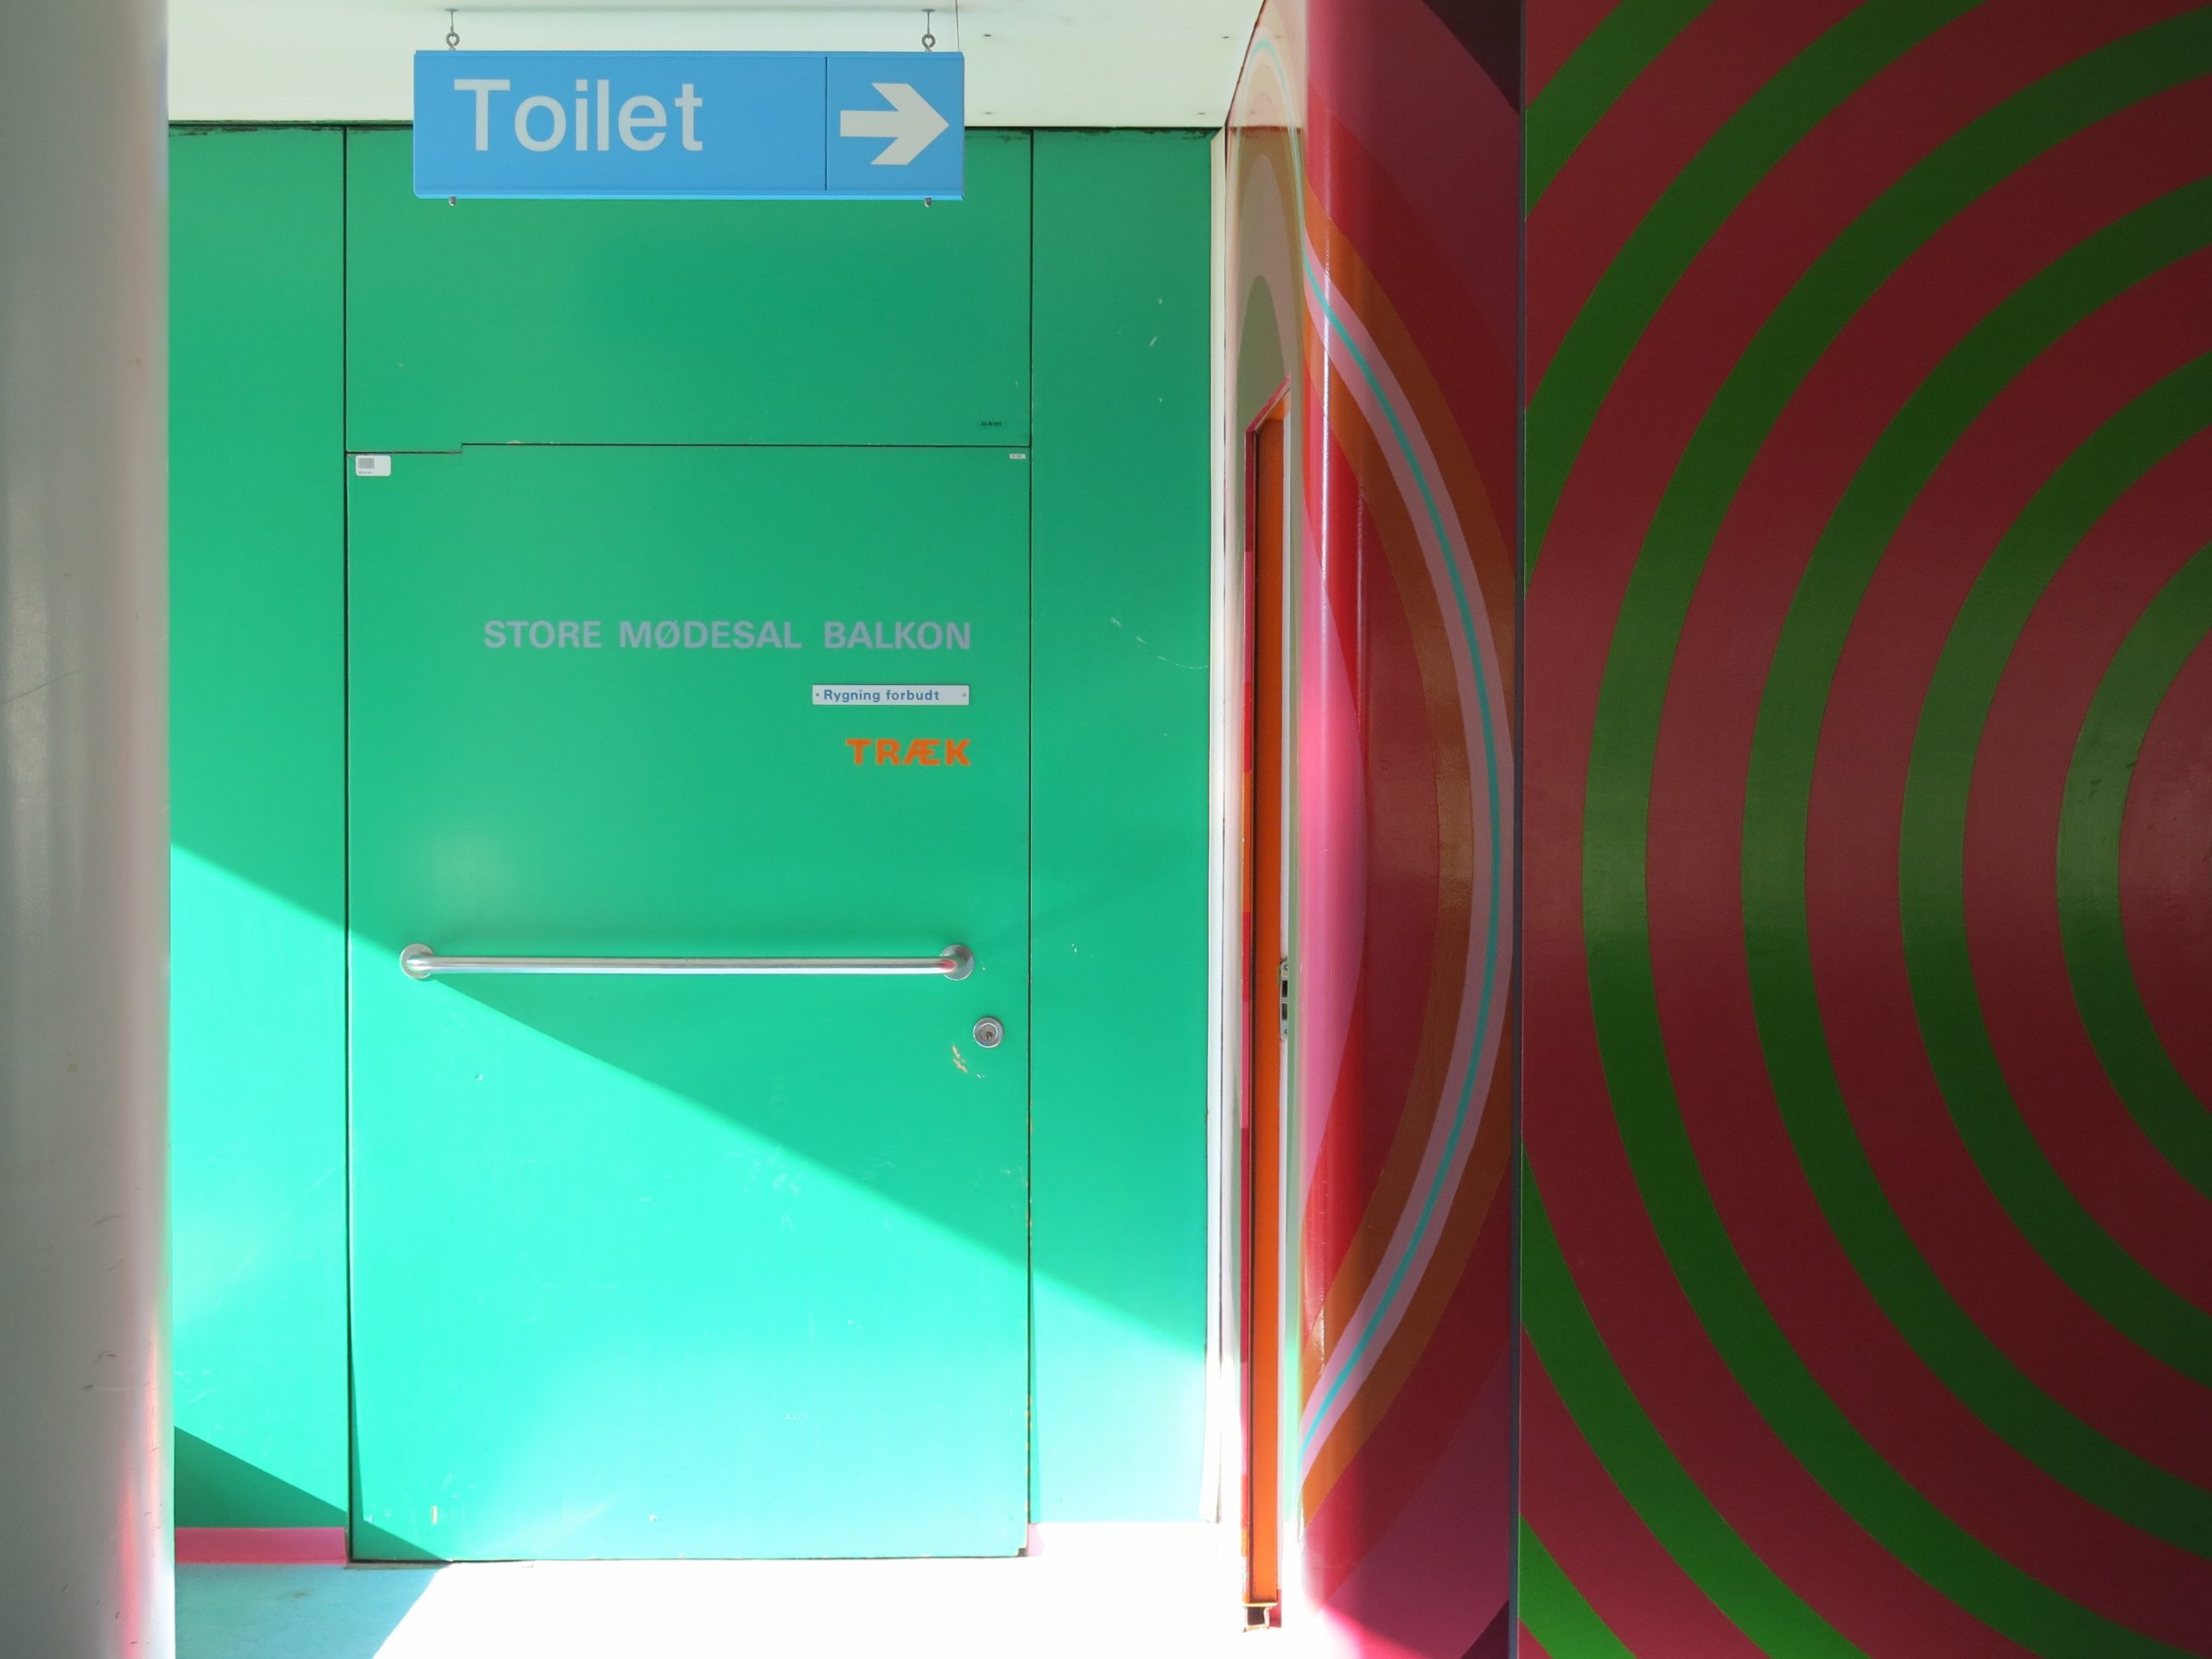 a green door, a blue toilet sign and a red wall